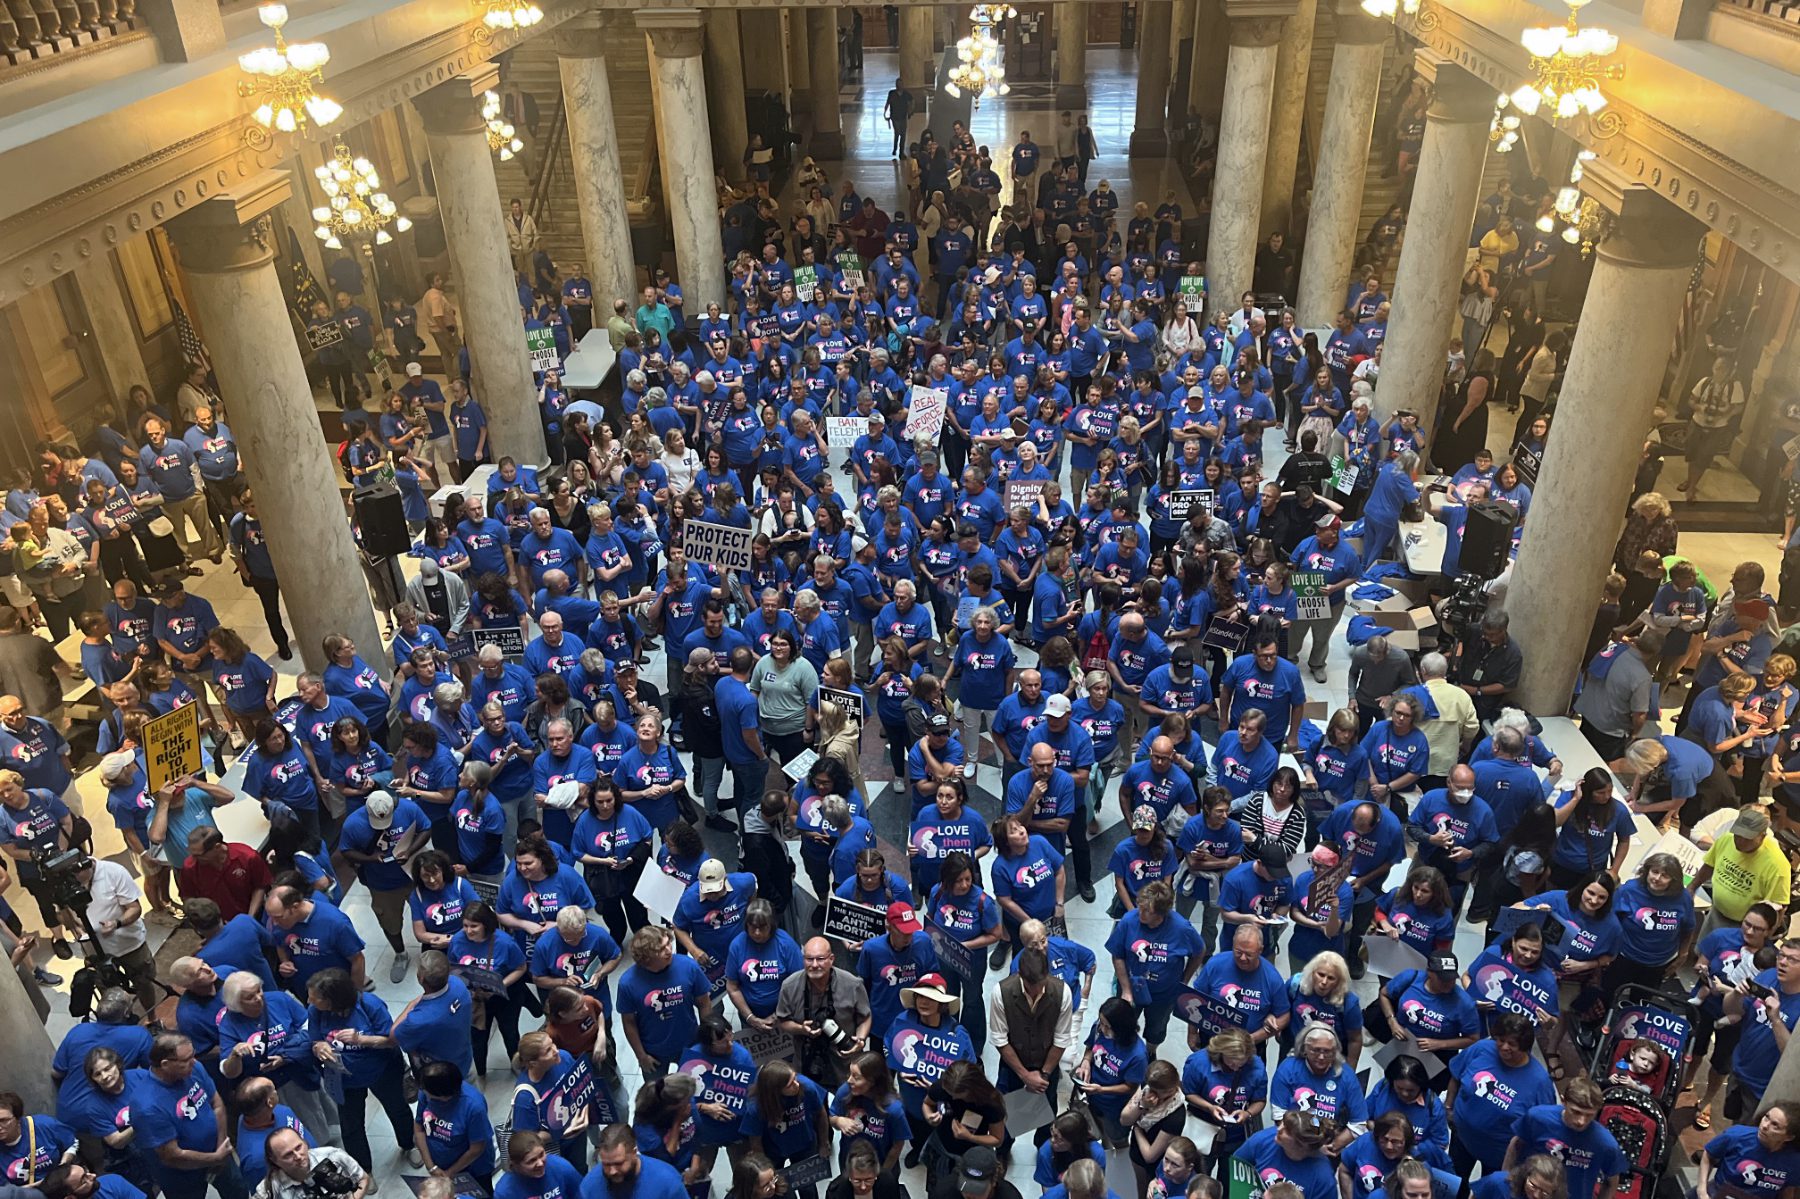 anti-abortion advocates in blue at the Indiana Capitol